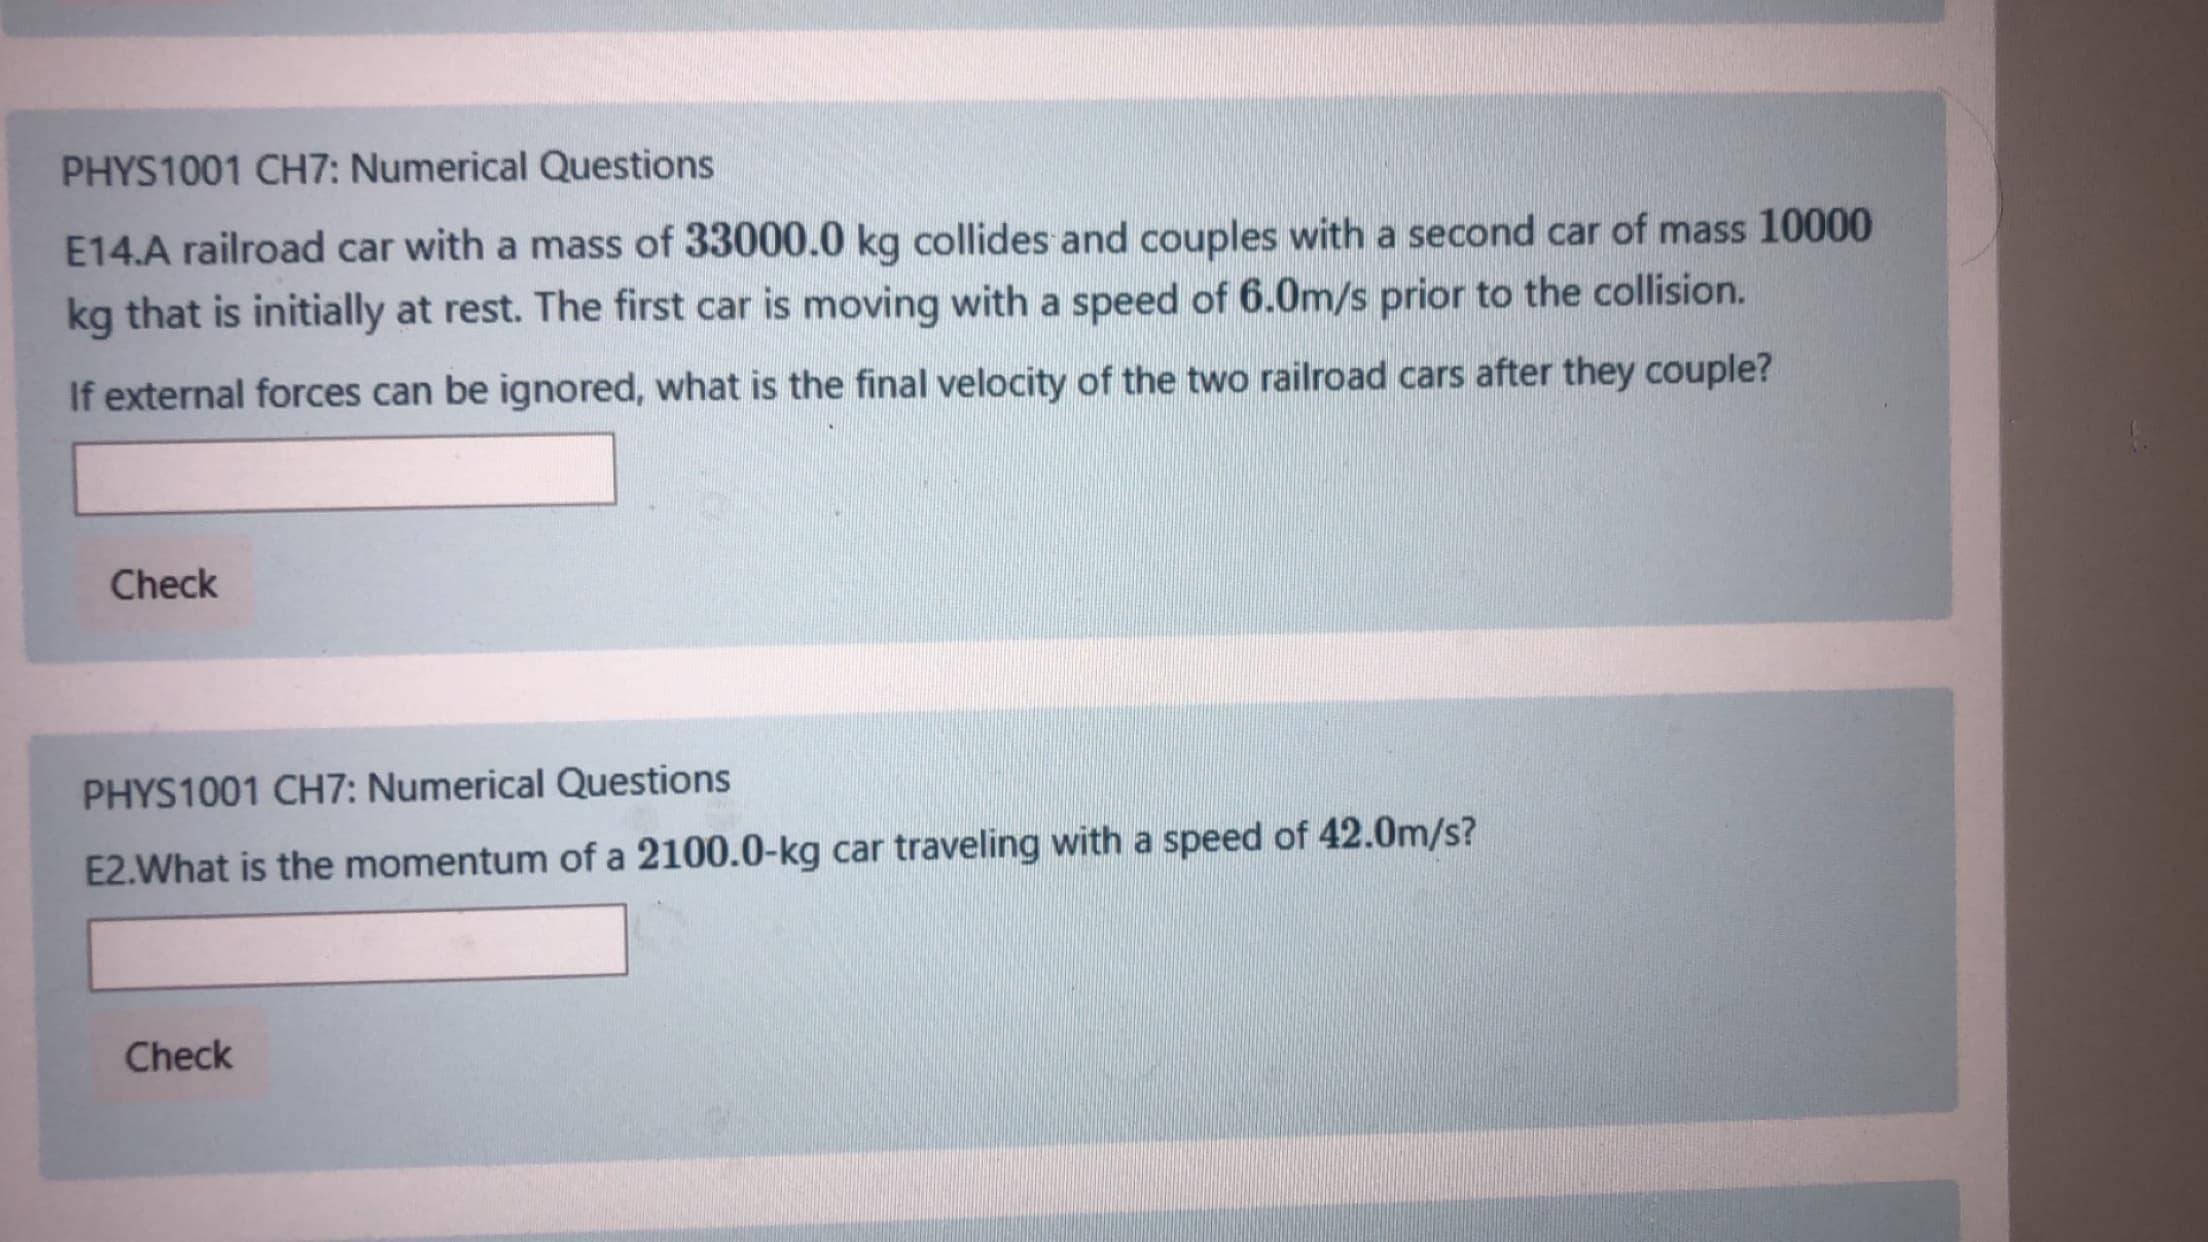 PHYS1001 CH7: Numerical Questions
E14.A railroad car with a mass of 33000.0 kg collides and couples with a second car of mass 10000
kg that is initially at rest. The first car is moving with a speed of 6.0m/s prior to the collision.
If external forces can be ignored, what is the final velocity of the two railroad cars after they couple?
Check
PHYS1001 CH7: Numerical Questions
E2.What is the momentum of a 2100.0-kg car traveling with a speed of 42.0m/s?
Check
